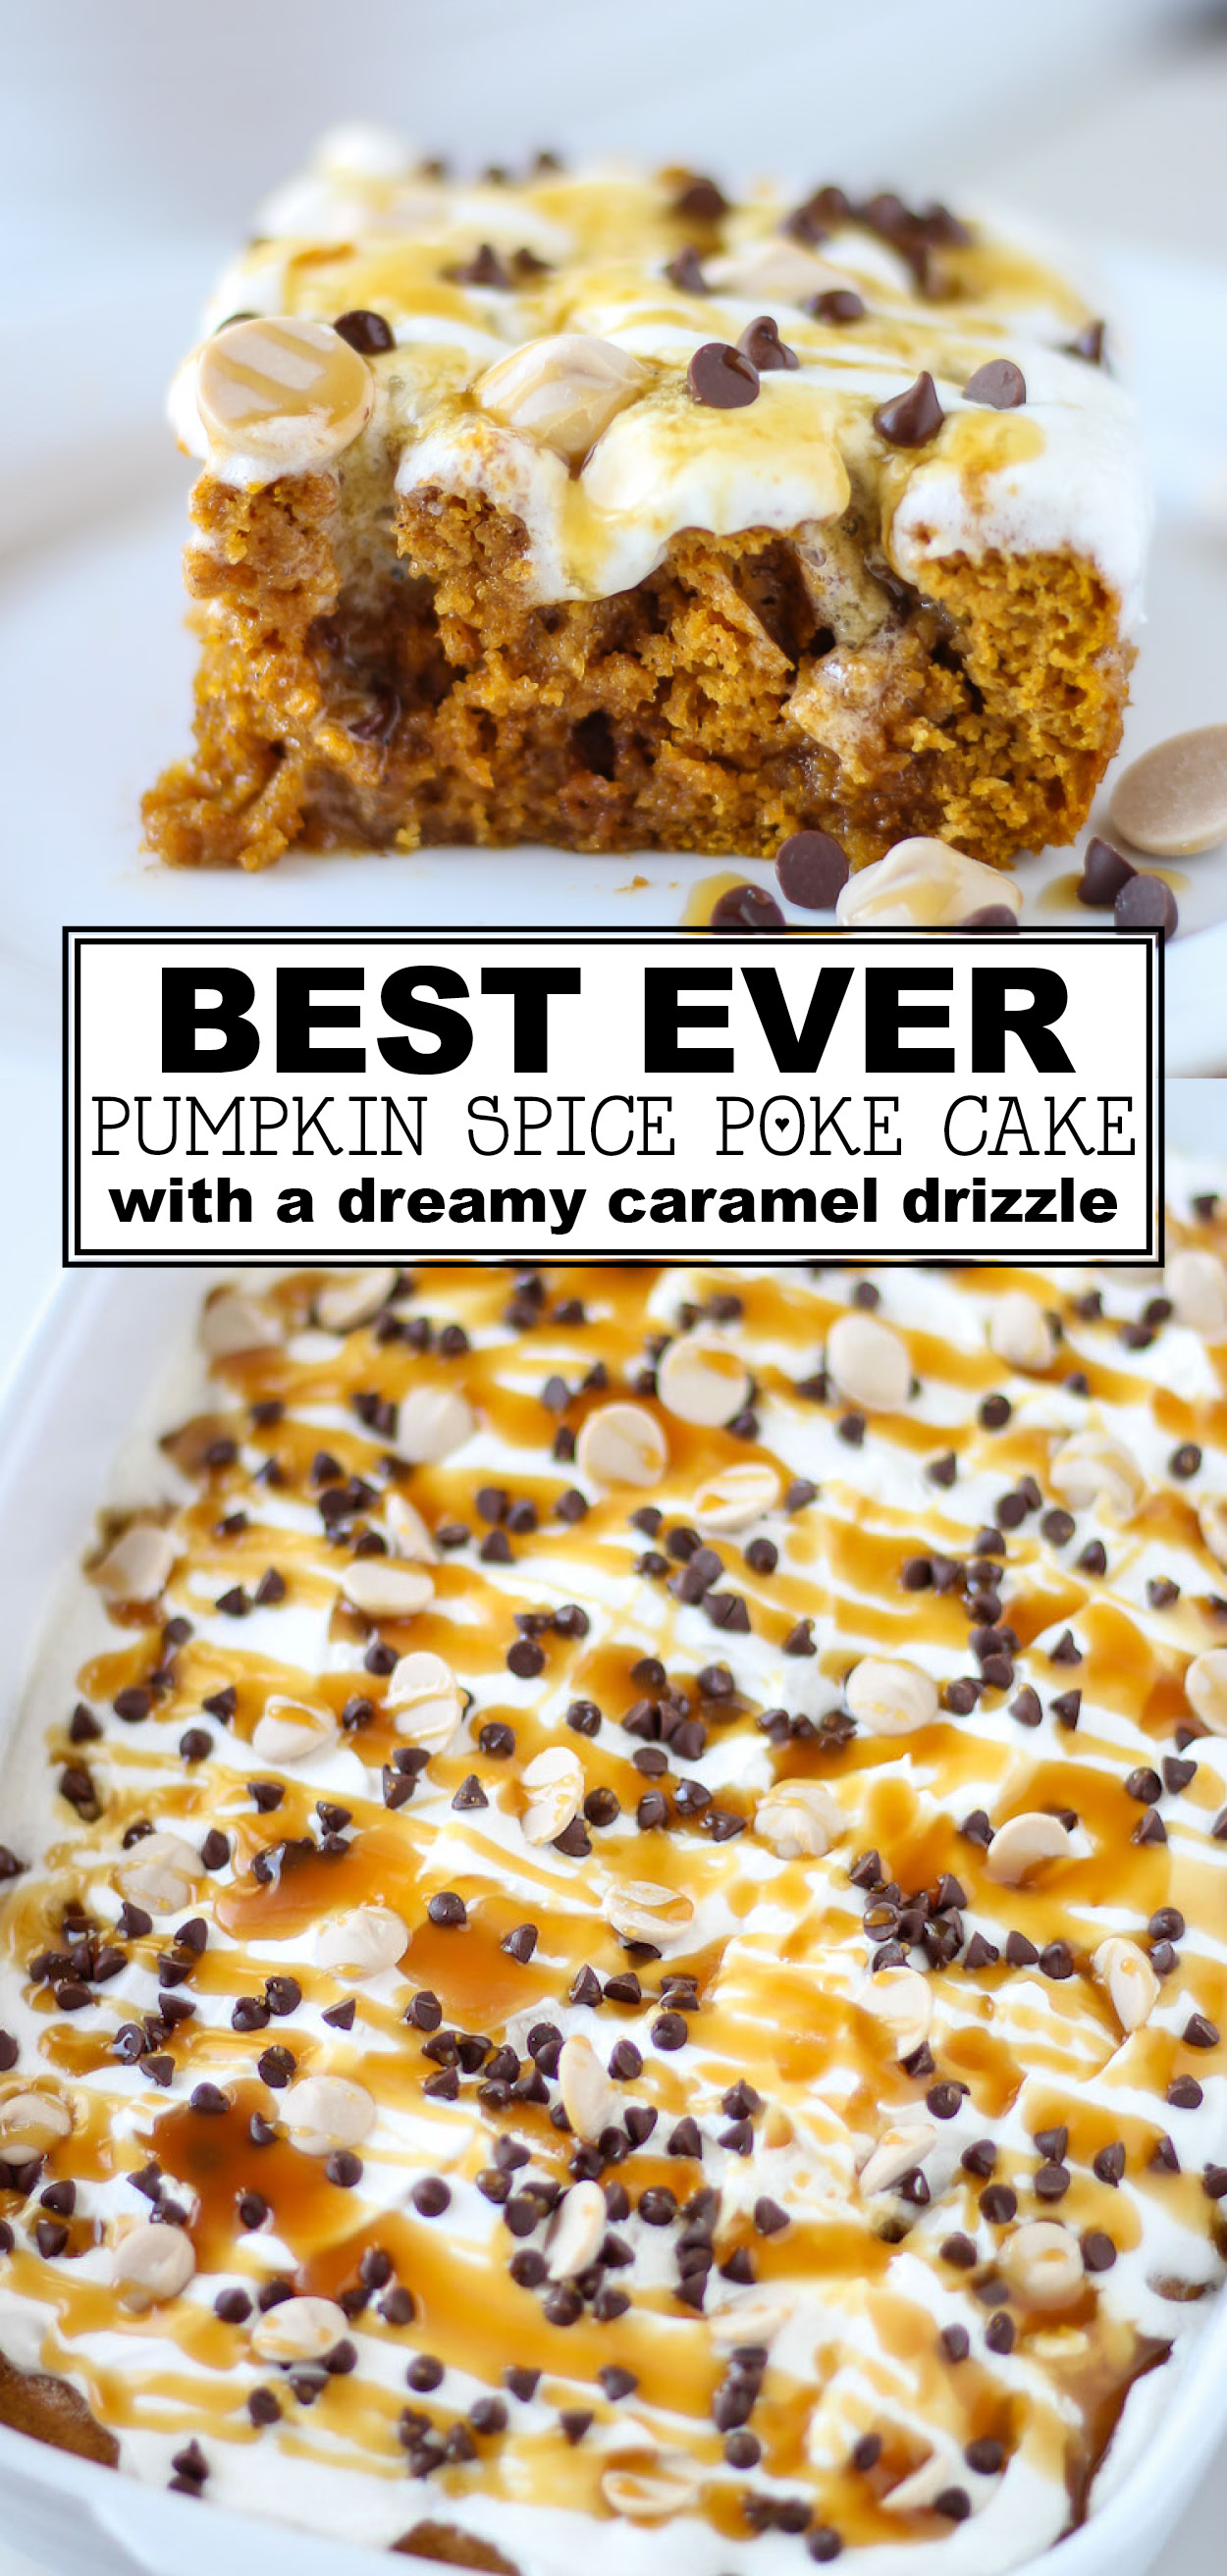 This holiday season you have to try the BEST Pumpkin Spice Poke Cake Recipe EVER! This cake is easy to make, and so moist and delicious. Combining the pumpkin spice, cream cheese frosting, and caramel flavors makes this dessert so delicious. Try this recipe and you will soon be enjoying the only cake you will want to make this holiday season. Make one for your next party and it will be a new favorite. #recipe #desserts #cake #easy #homemade